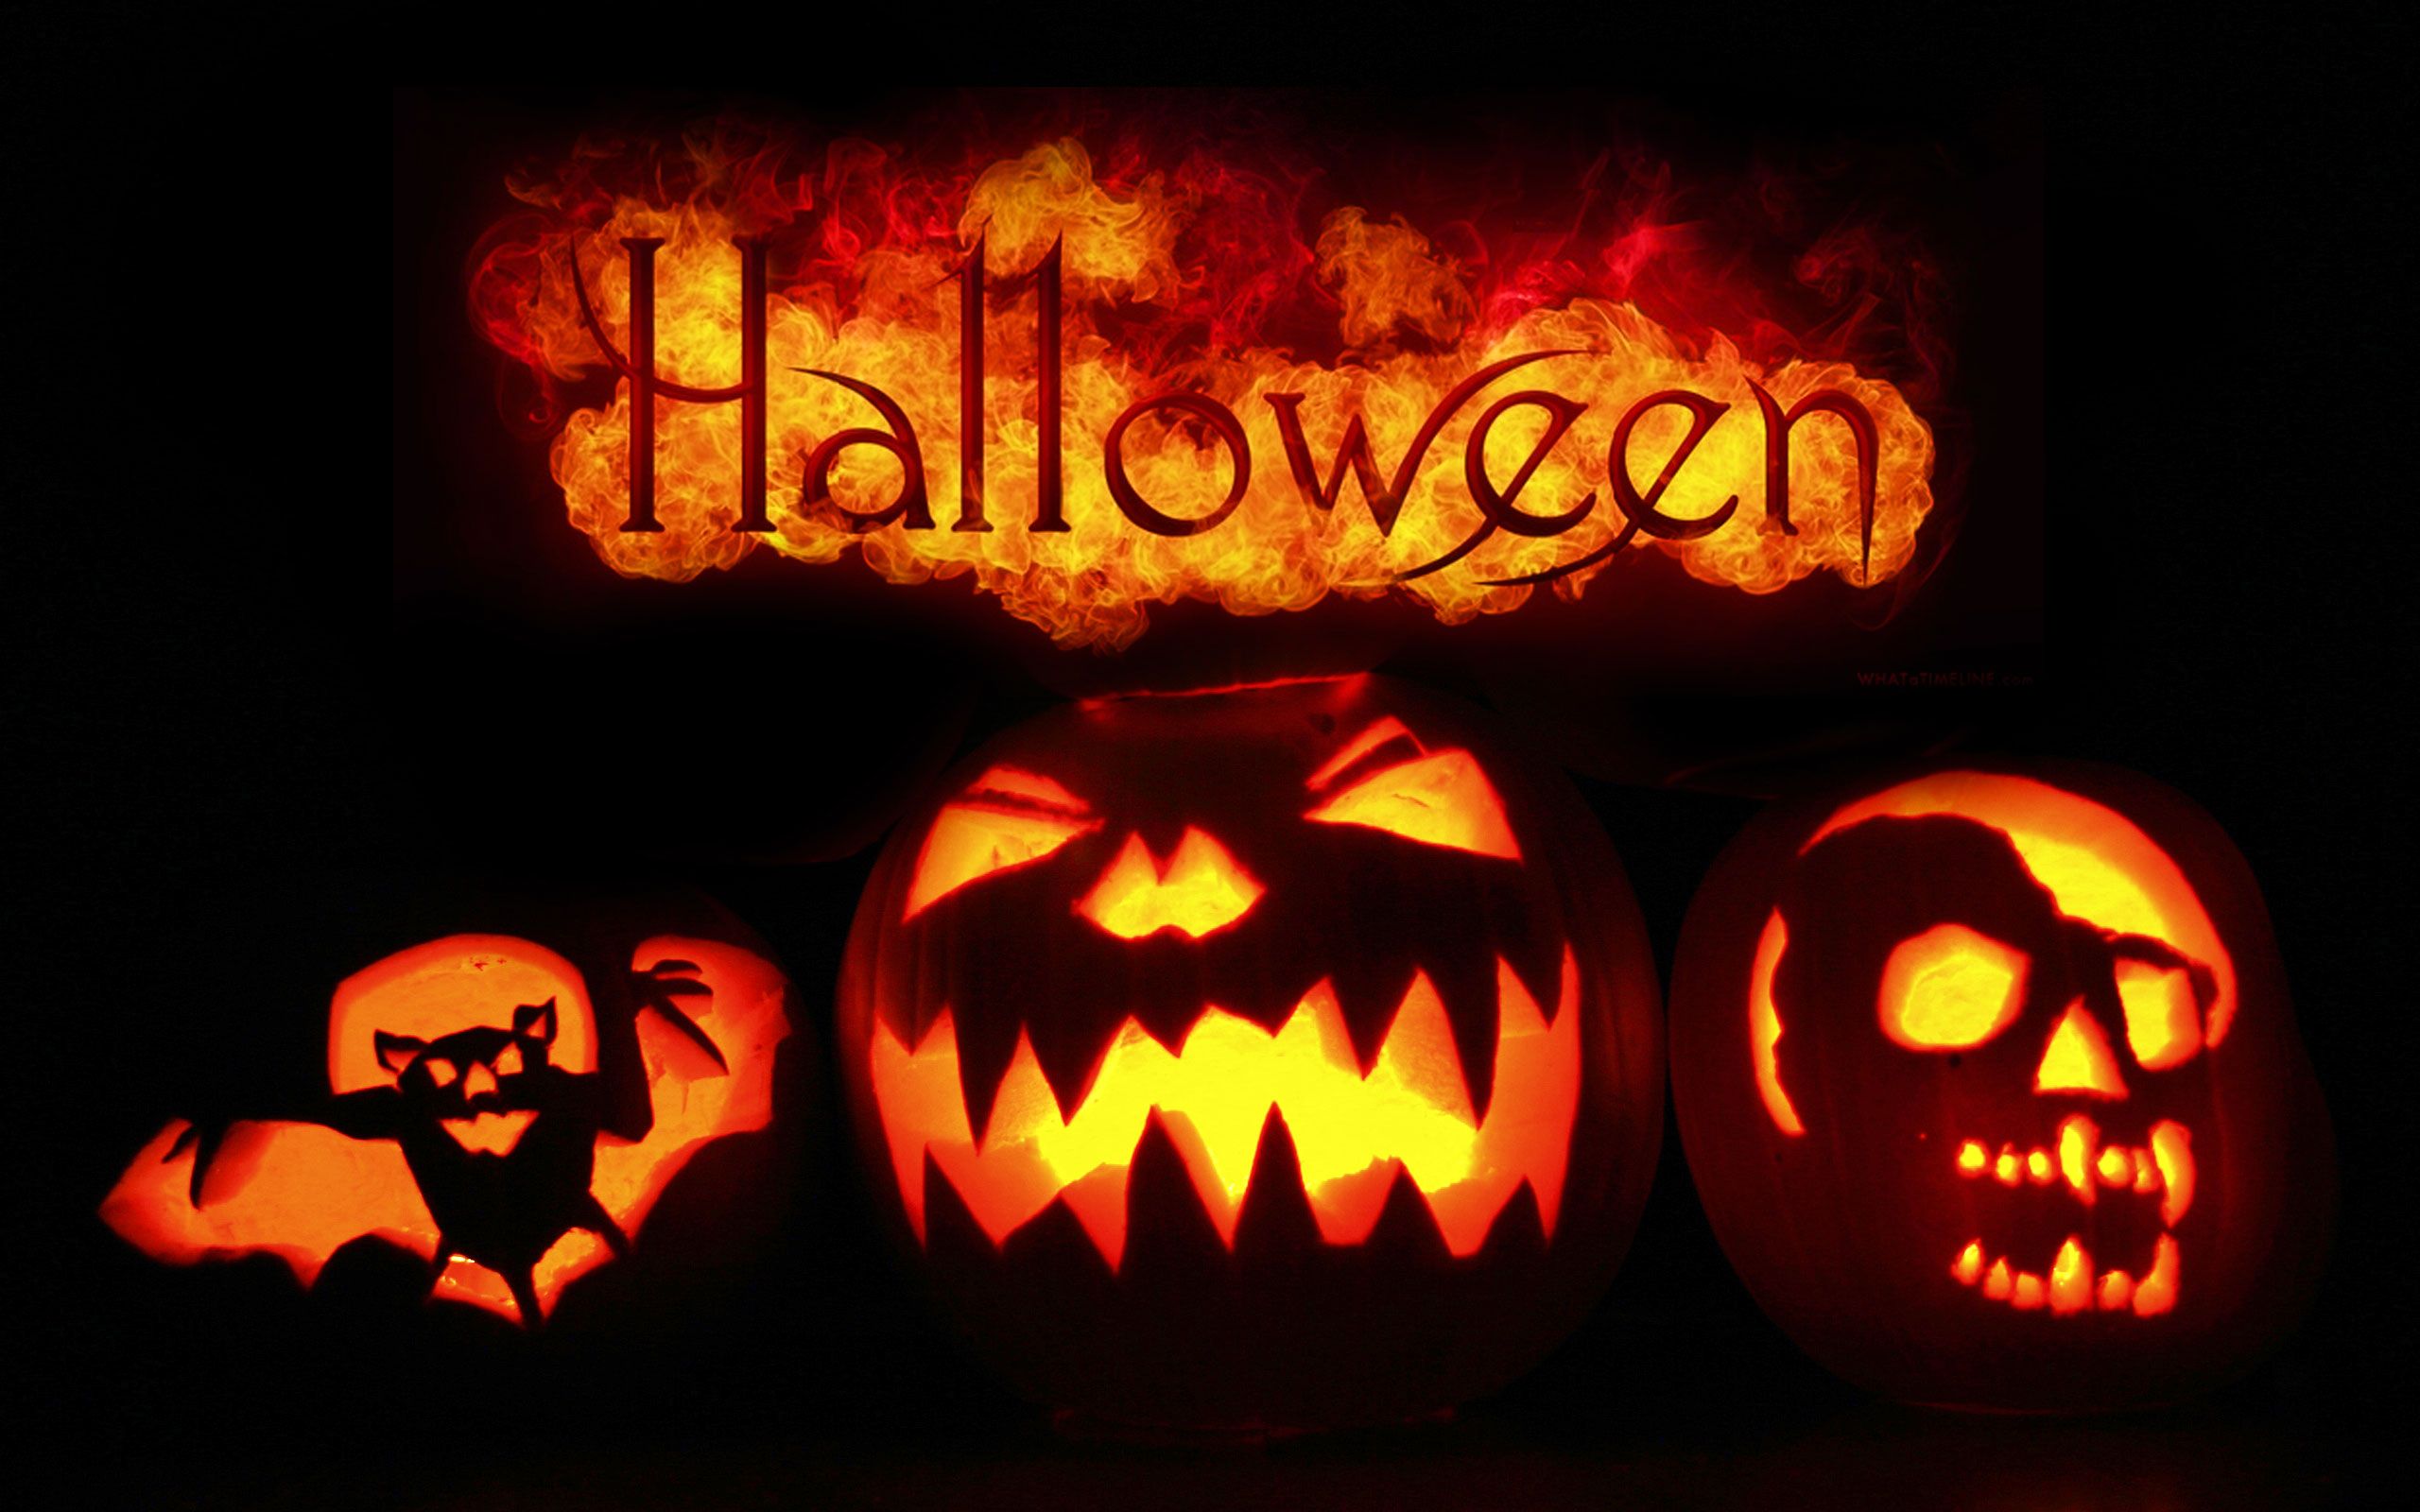 Scary Happy Halloween 2015 Image, Background, Wallpaper, Ideas & Photo